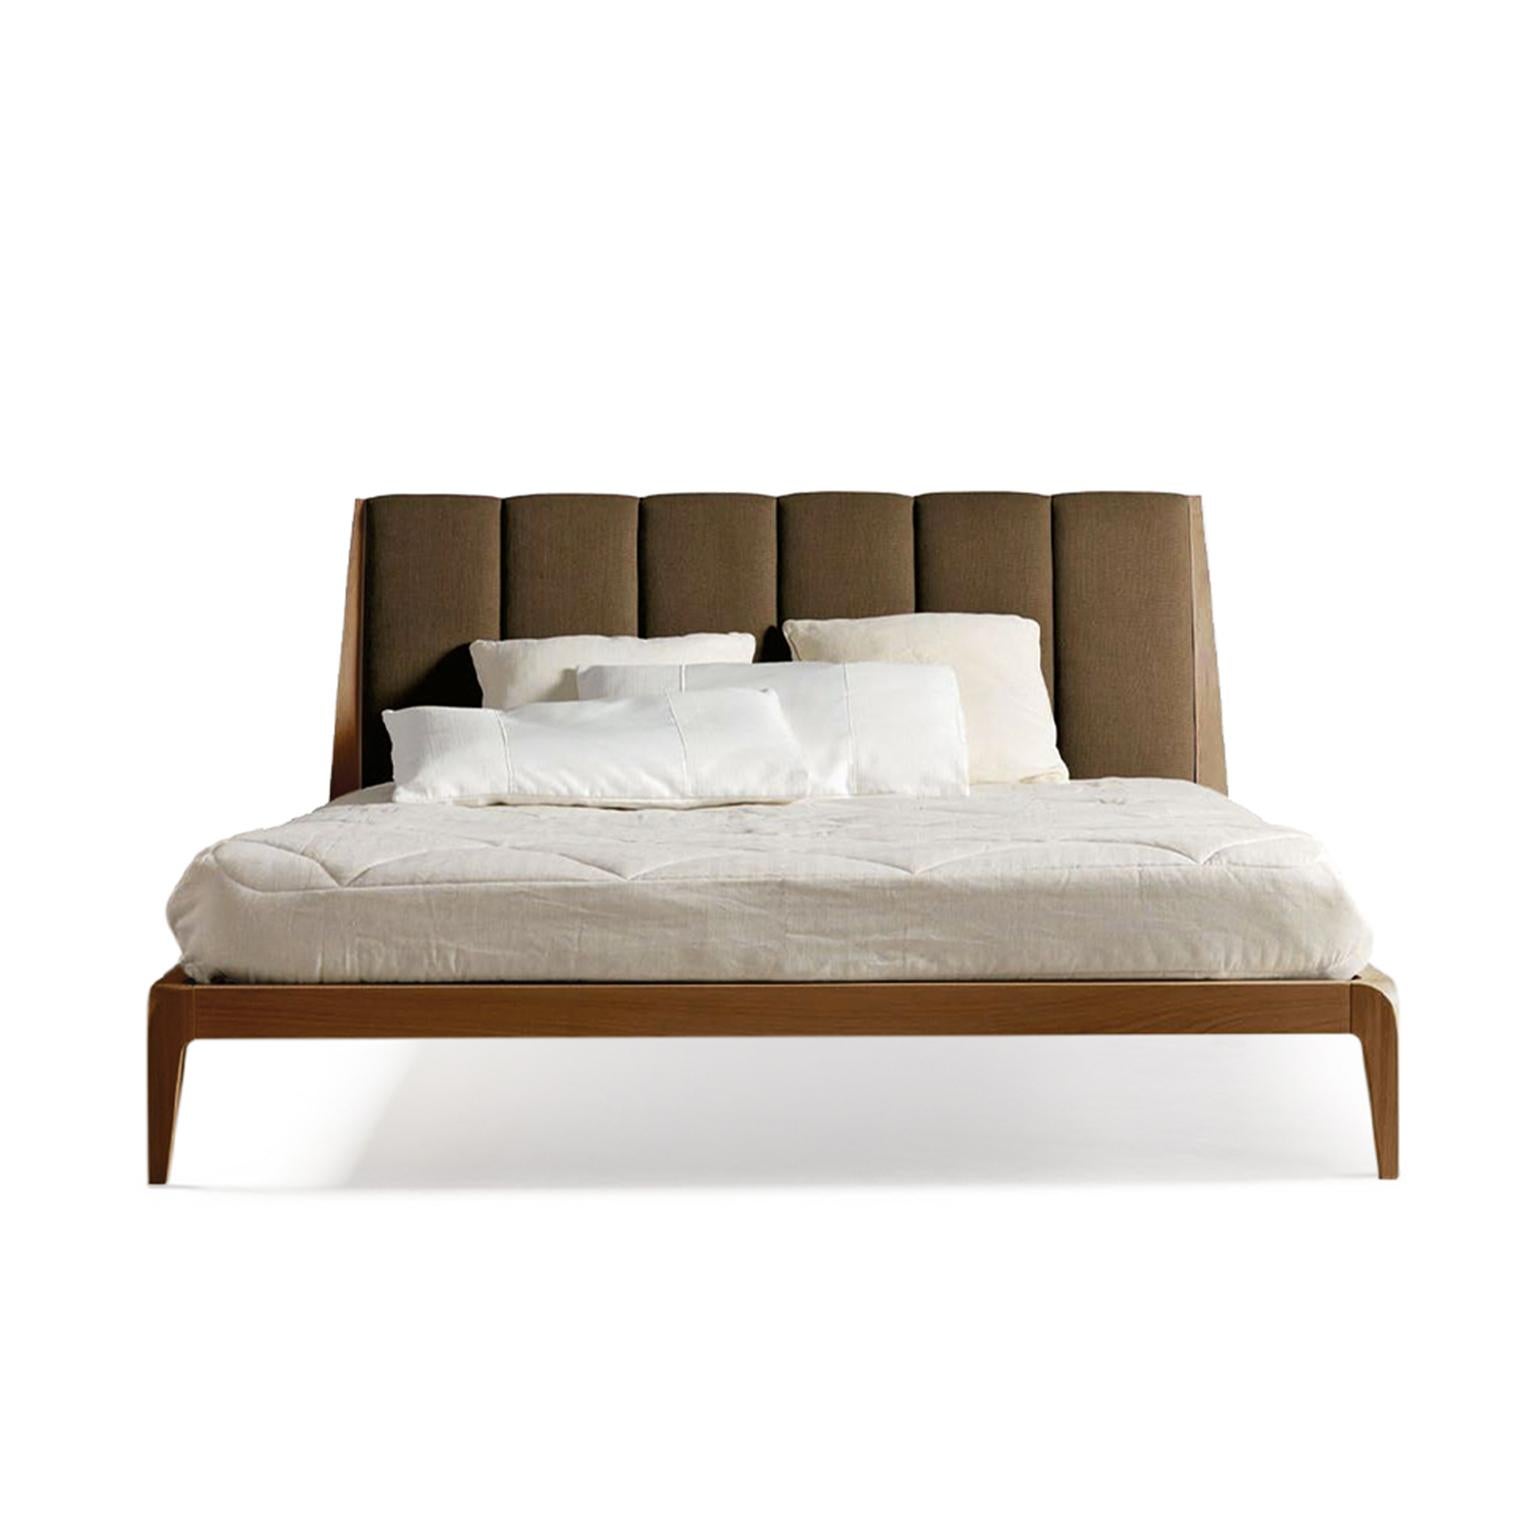 Verso Nord Solid Wood Bed, Walnut in Hand-Made Natural Finish, Contemporary For Sale 2